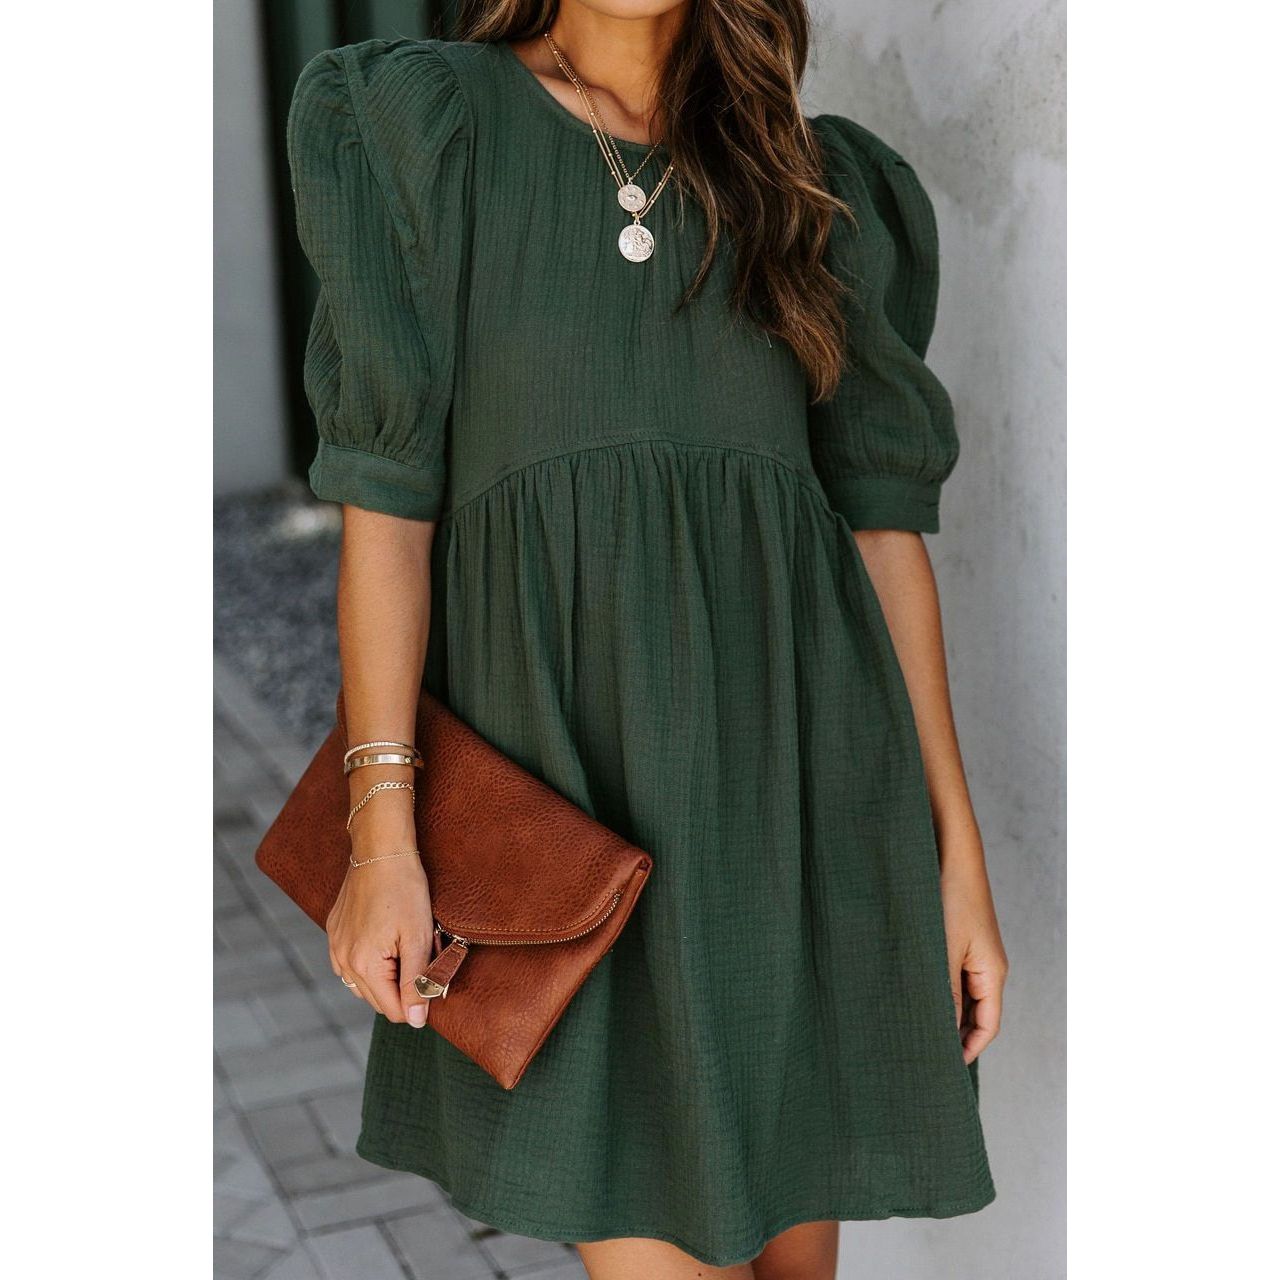 Pink/Gray/Green Pocketed Puff Sleeve Empire Waist Swing Short Dress for Women - Frimunt Clothing Co.